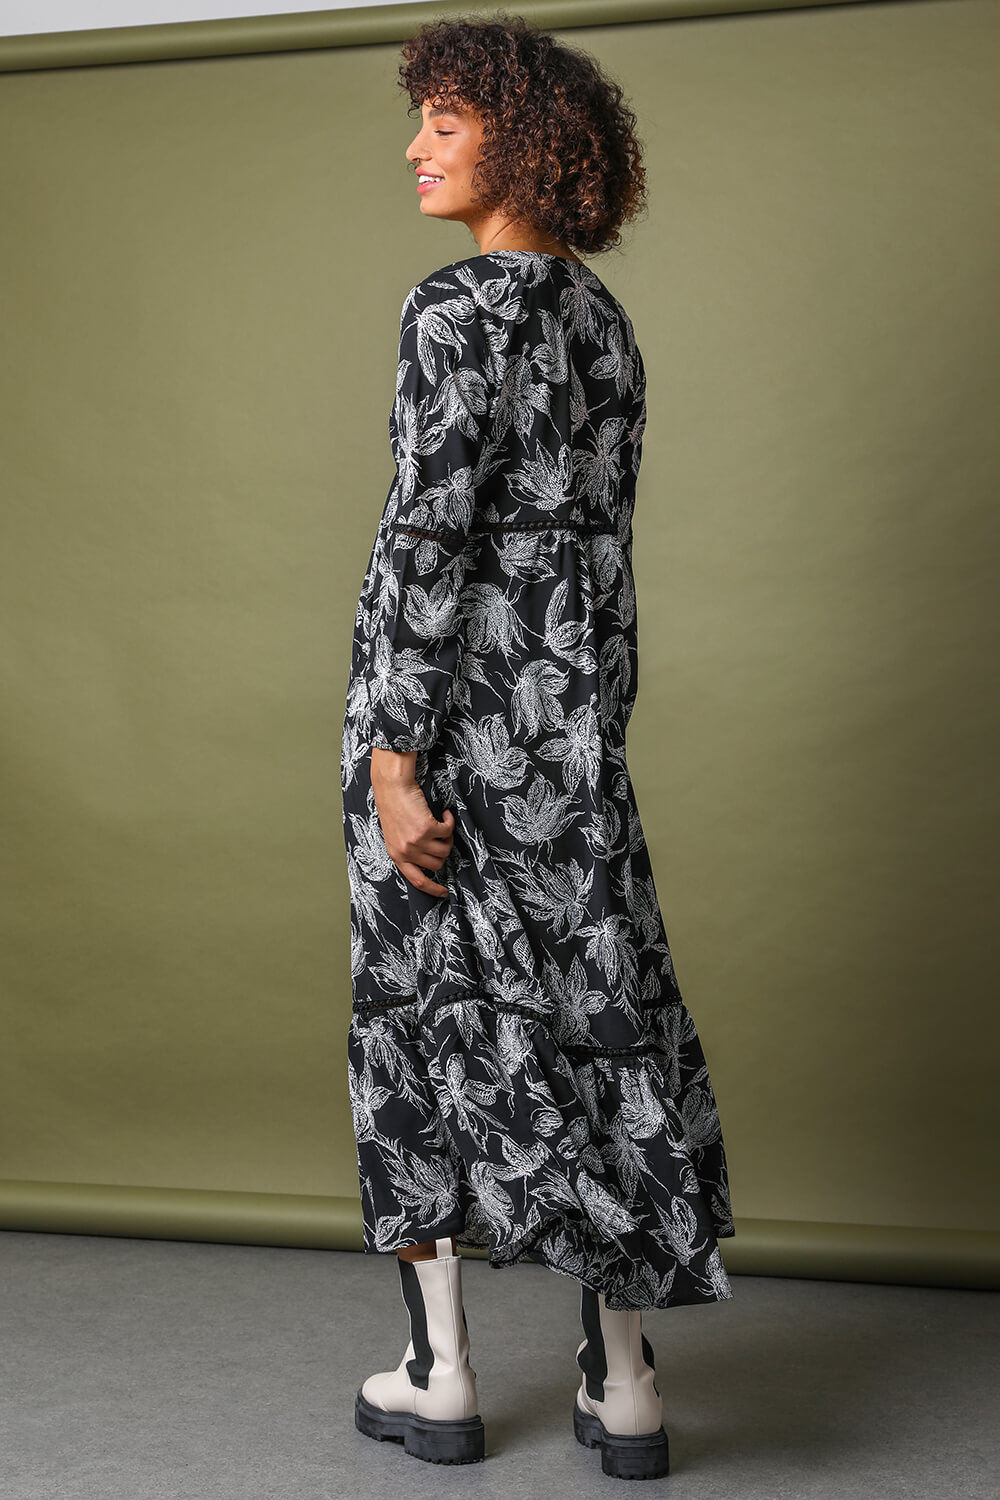 Black Floral Print Tiered Maxi Dress, Image 2 of 5